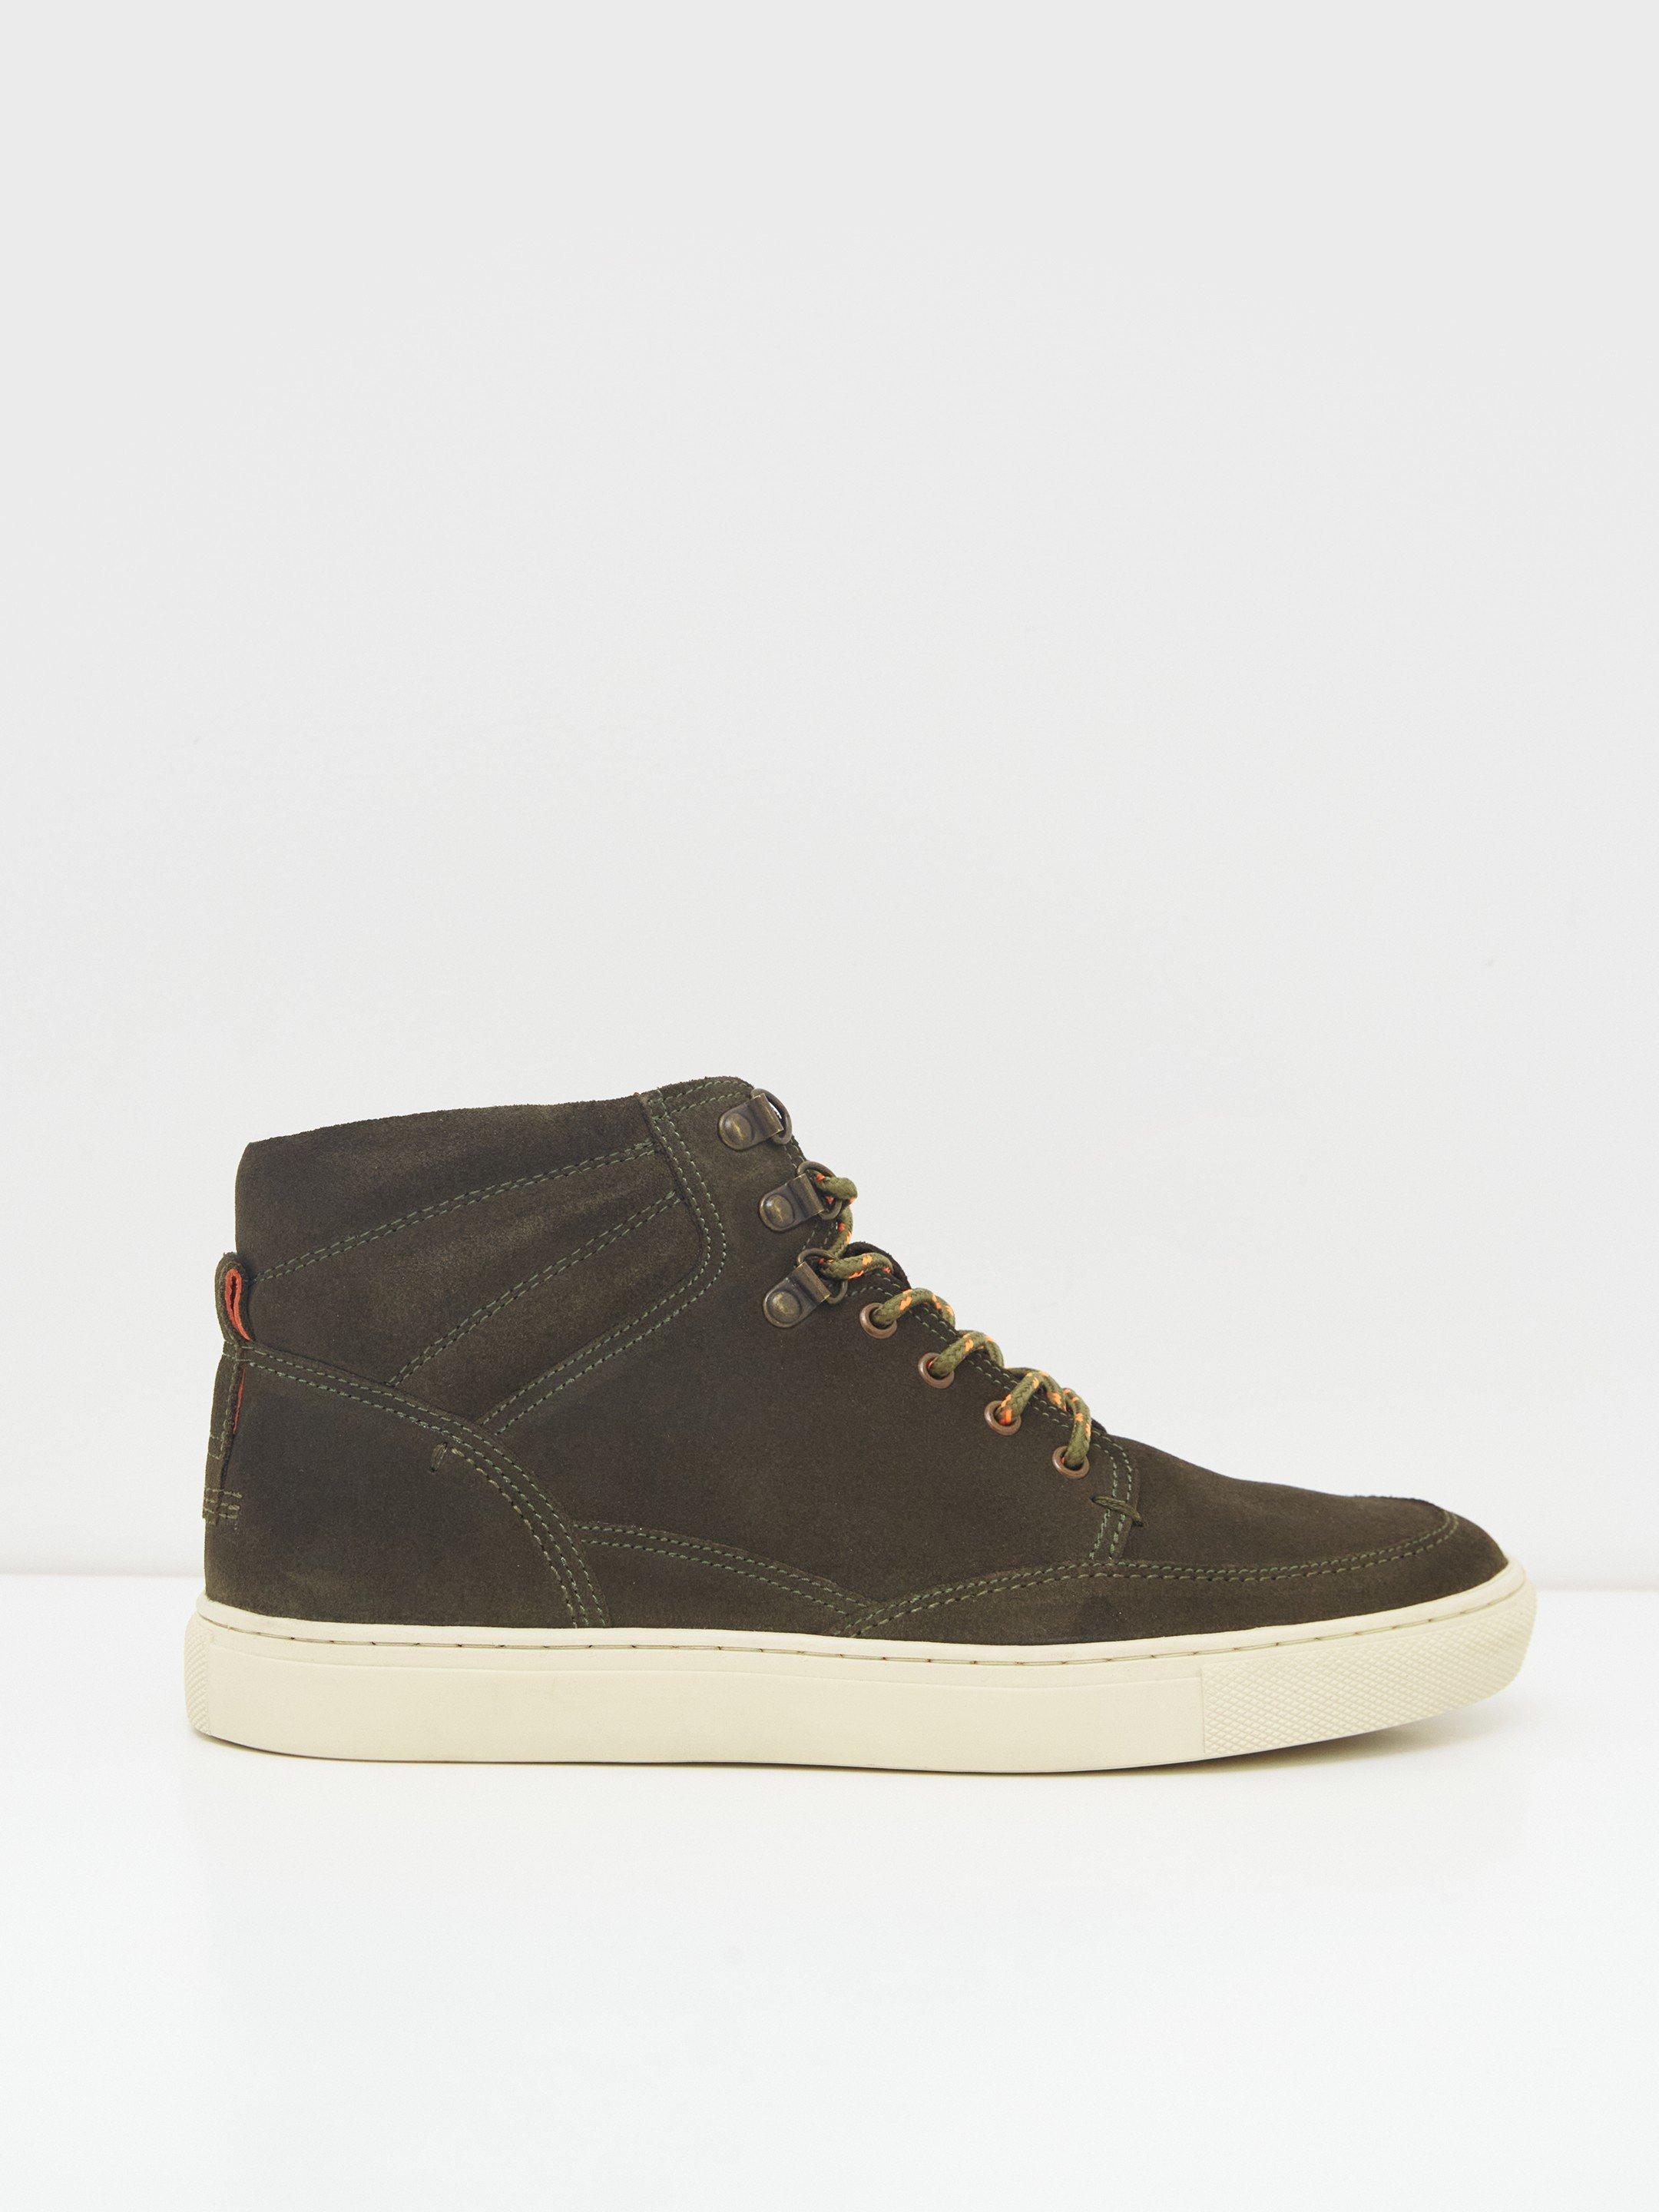 Woody Suede High Top Trainer in KHAKI GRN - MODEL FRONT